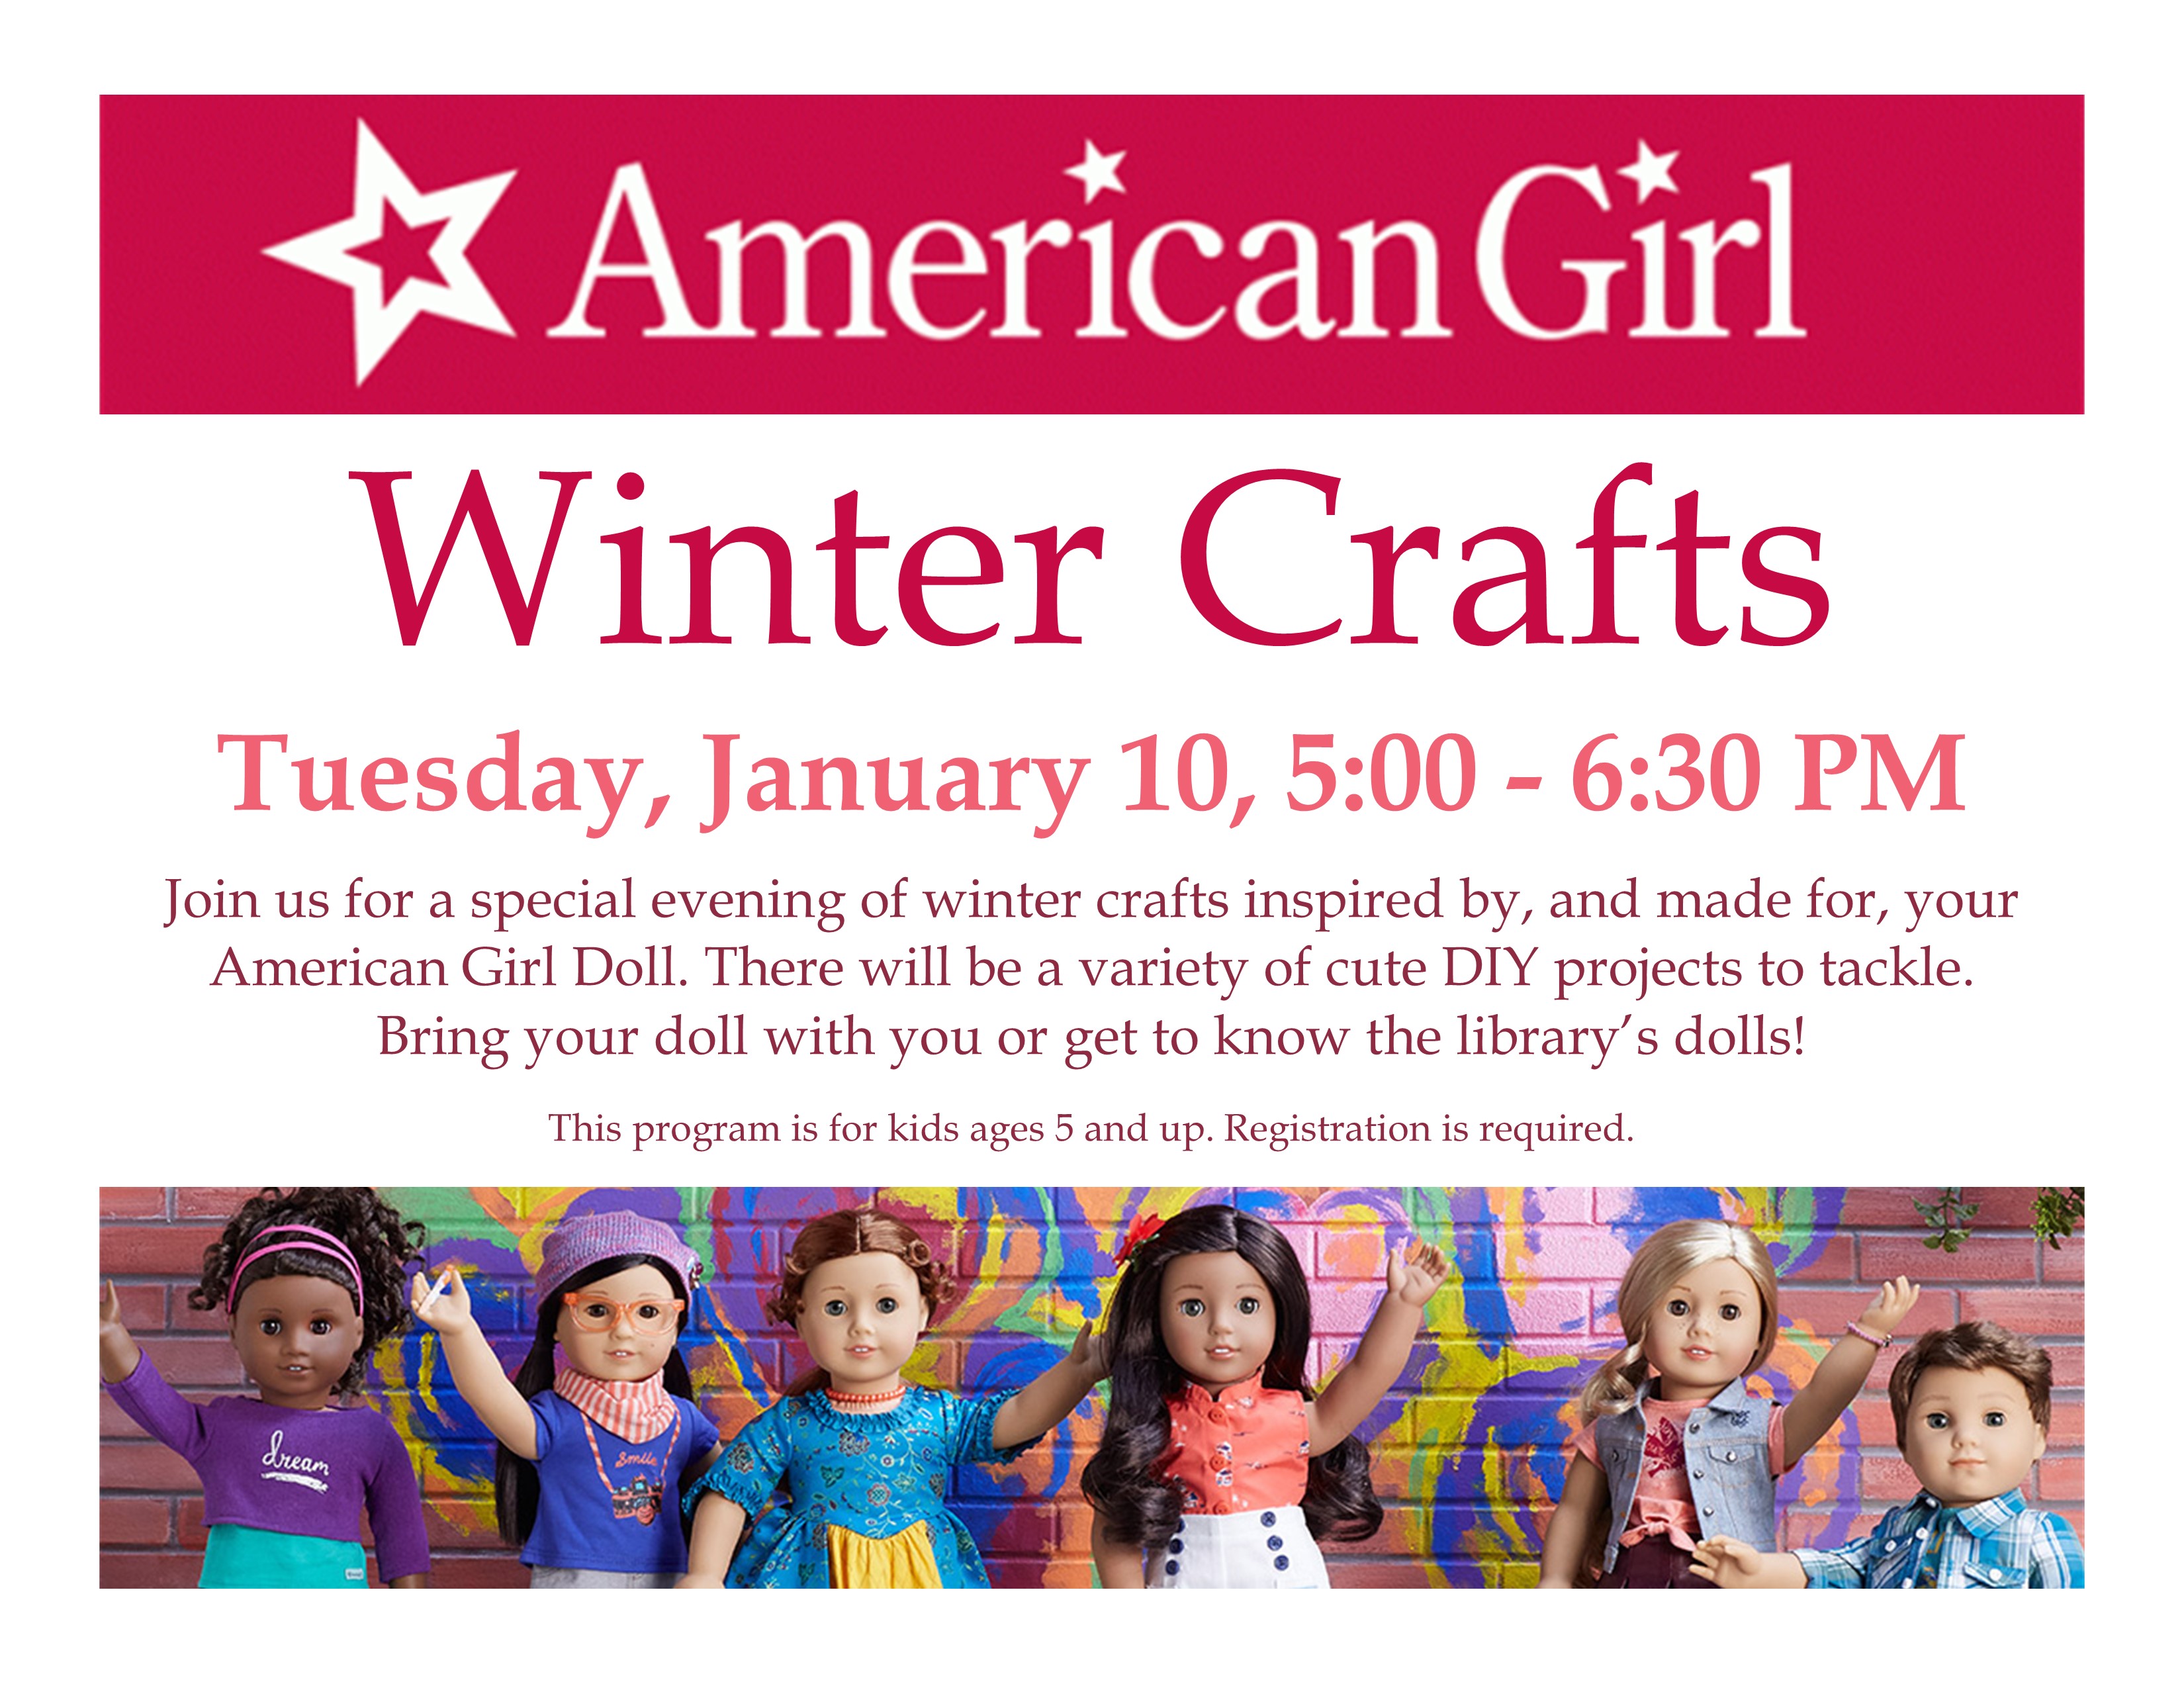 Red banner with white star and American Girl logo with American Girl dolls below.